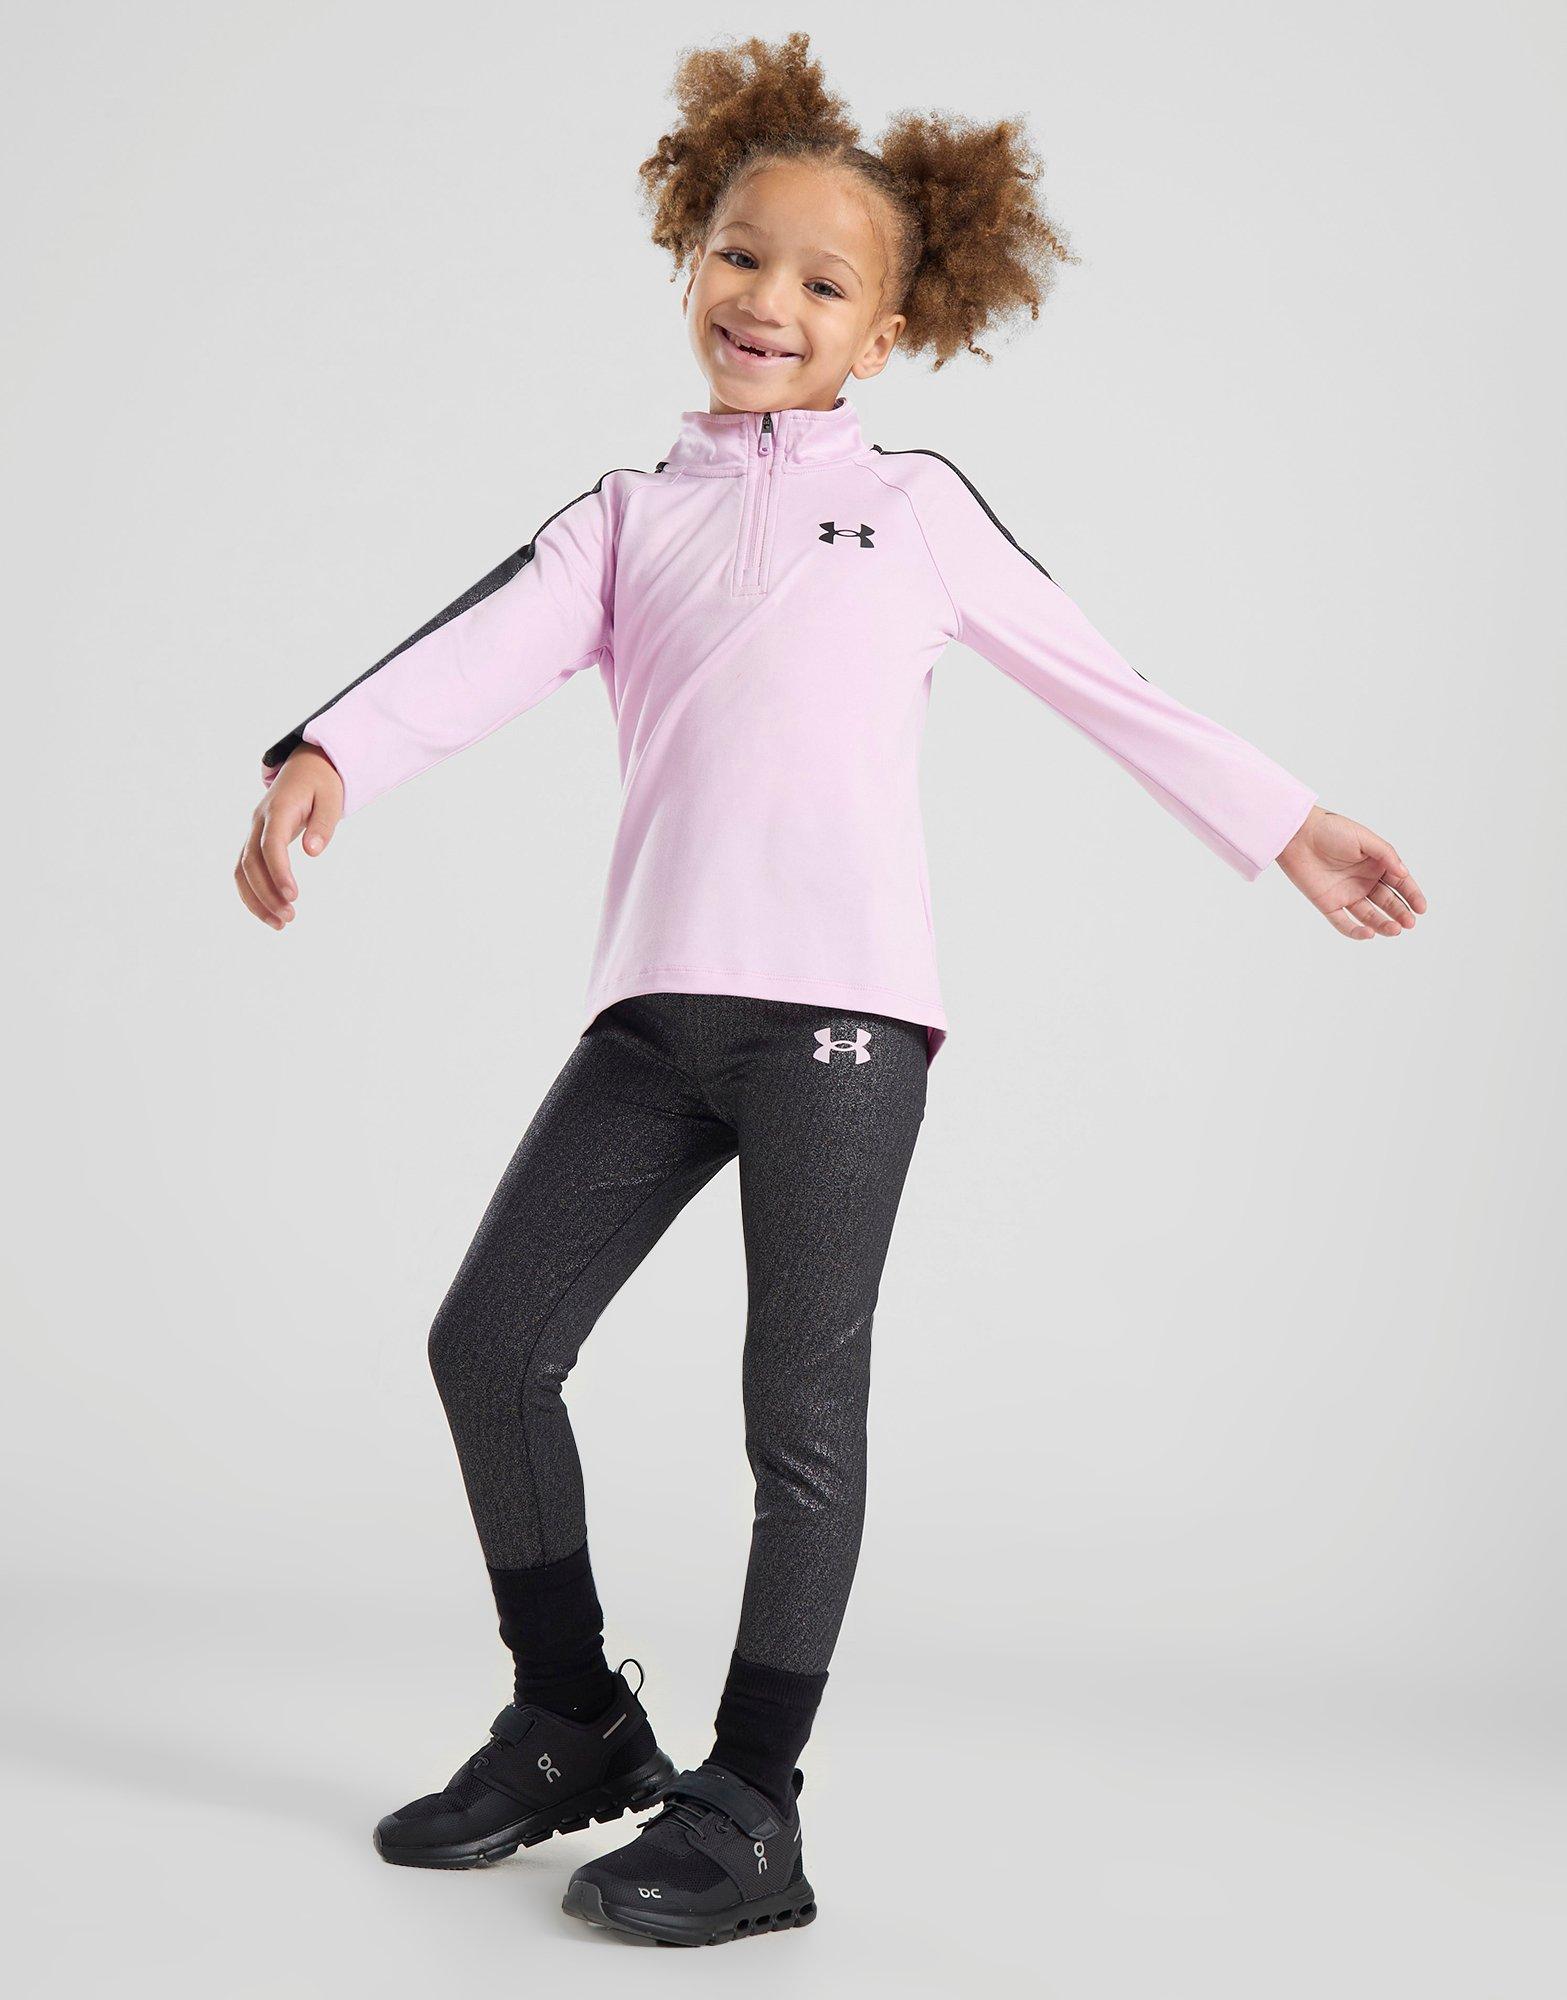 Under Armour Toddler Girls My Time to Shine Flare Leggings Set Outfit NEW